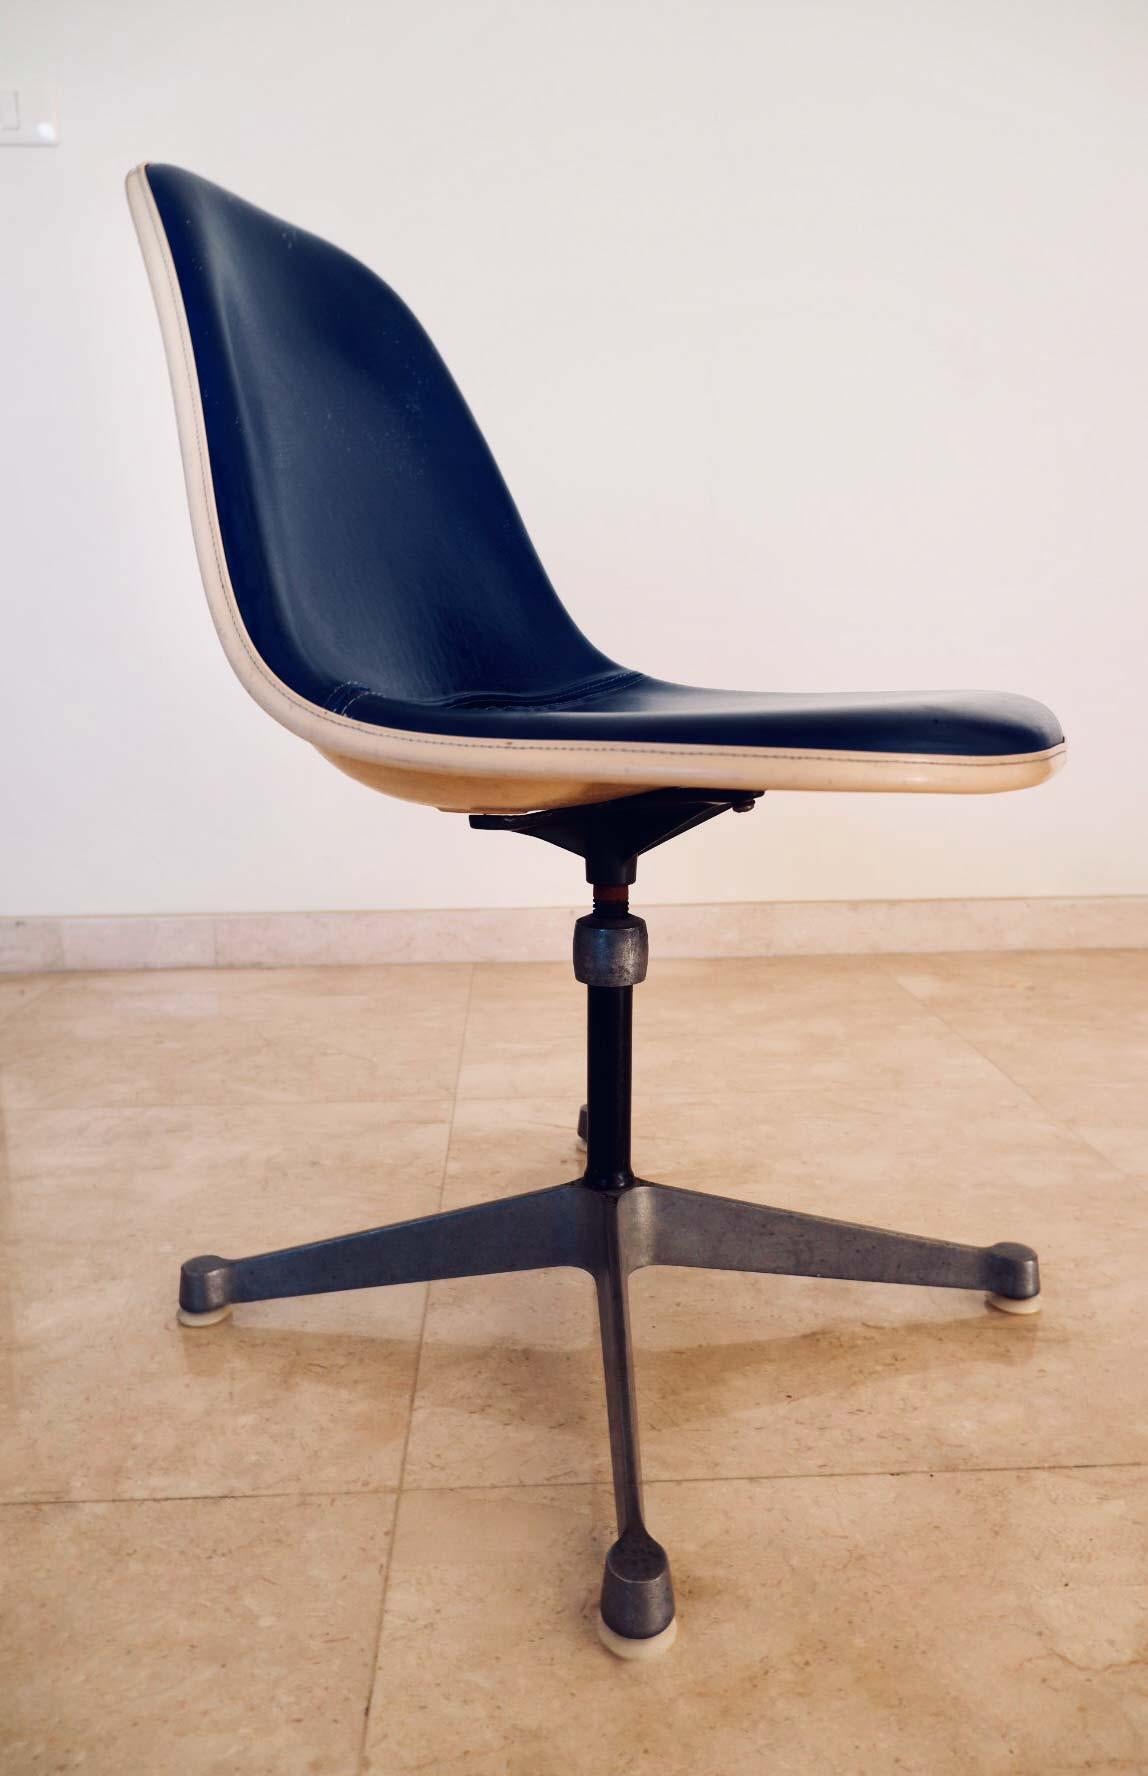 A vintage desk chair designed by Charles and Ray Eames for Herman Miller. The fiberglass shell is excellent with no cracks. Polished aluminium swivel base, which is height adjustable, very minor wear ( small white removable paint spots on the vinyl